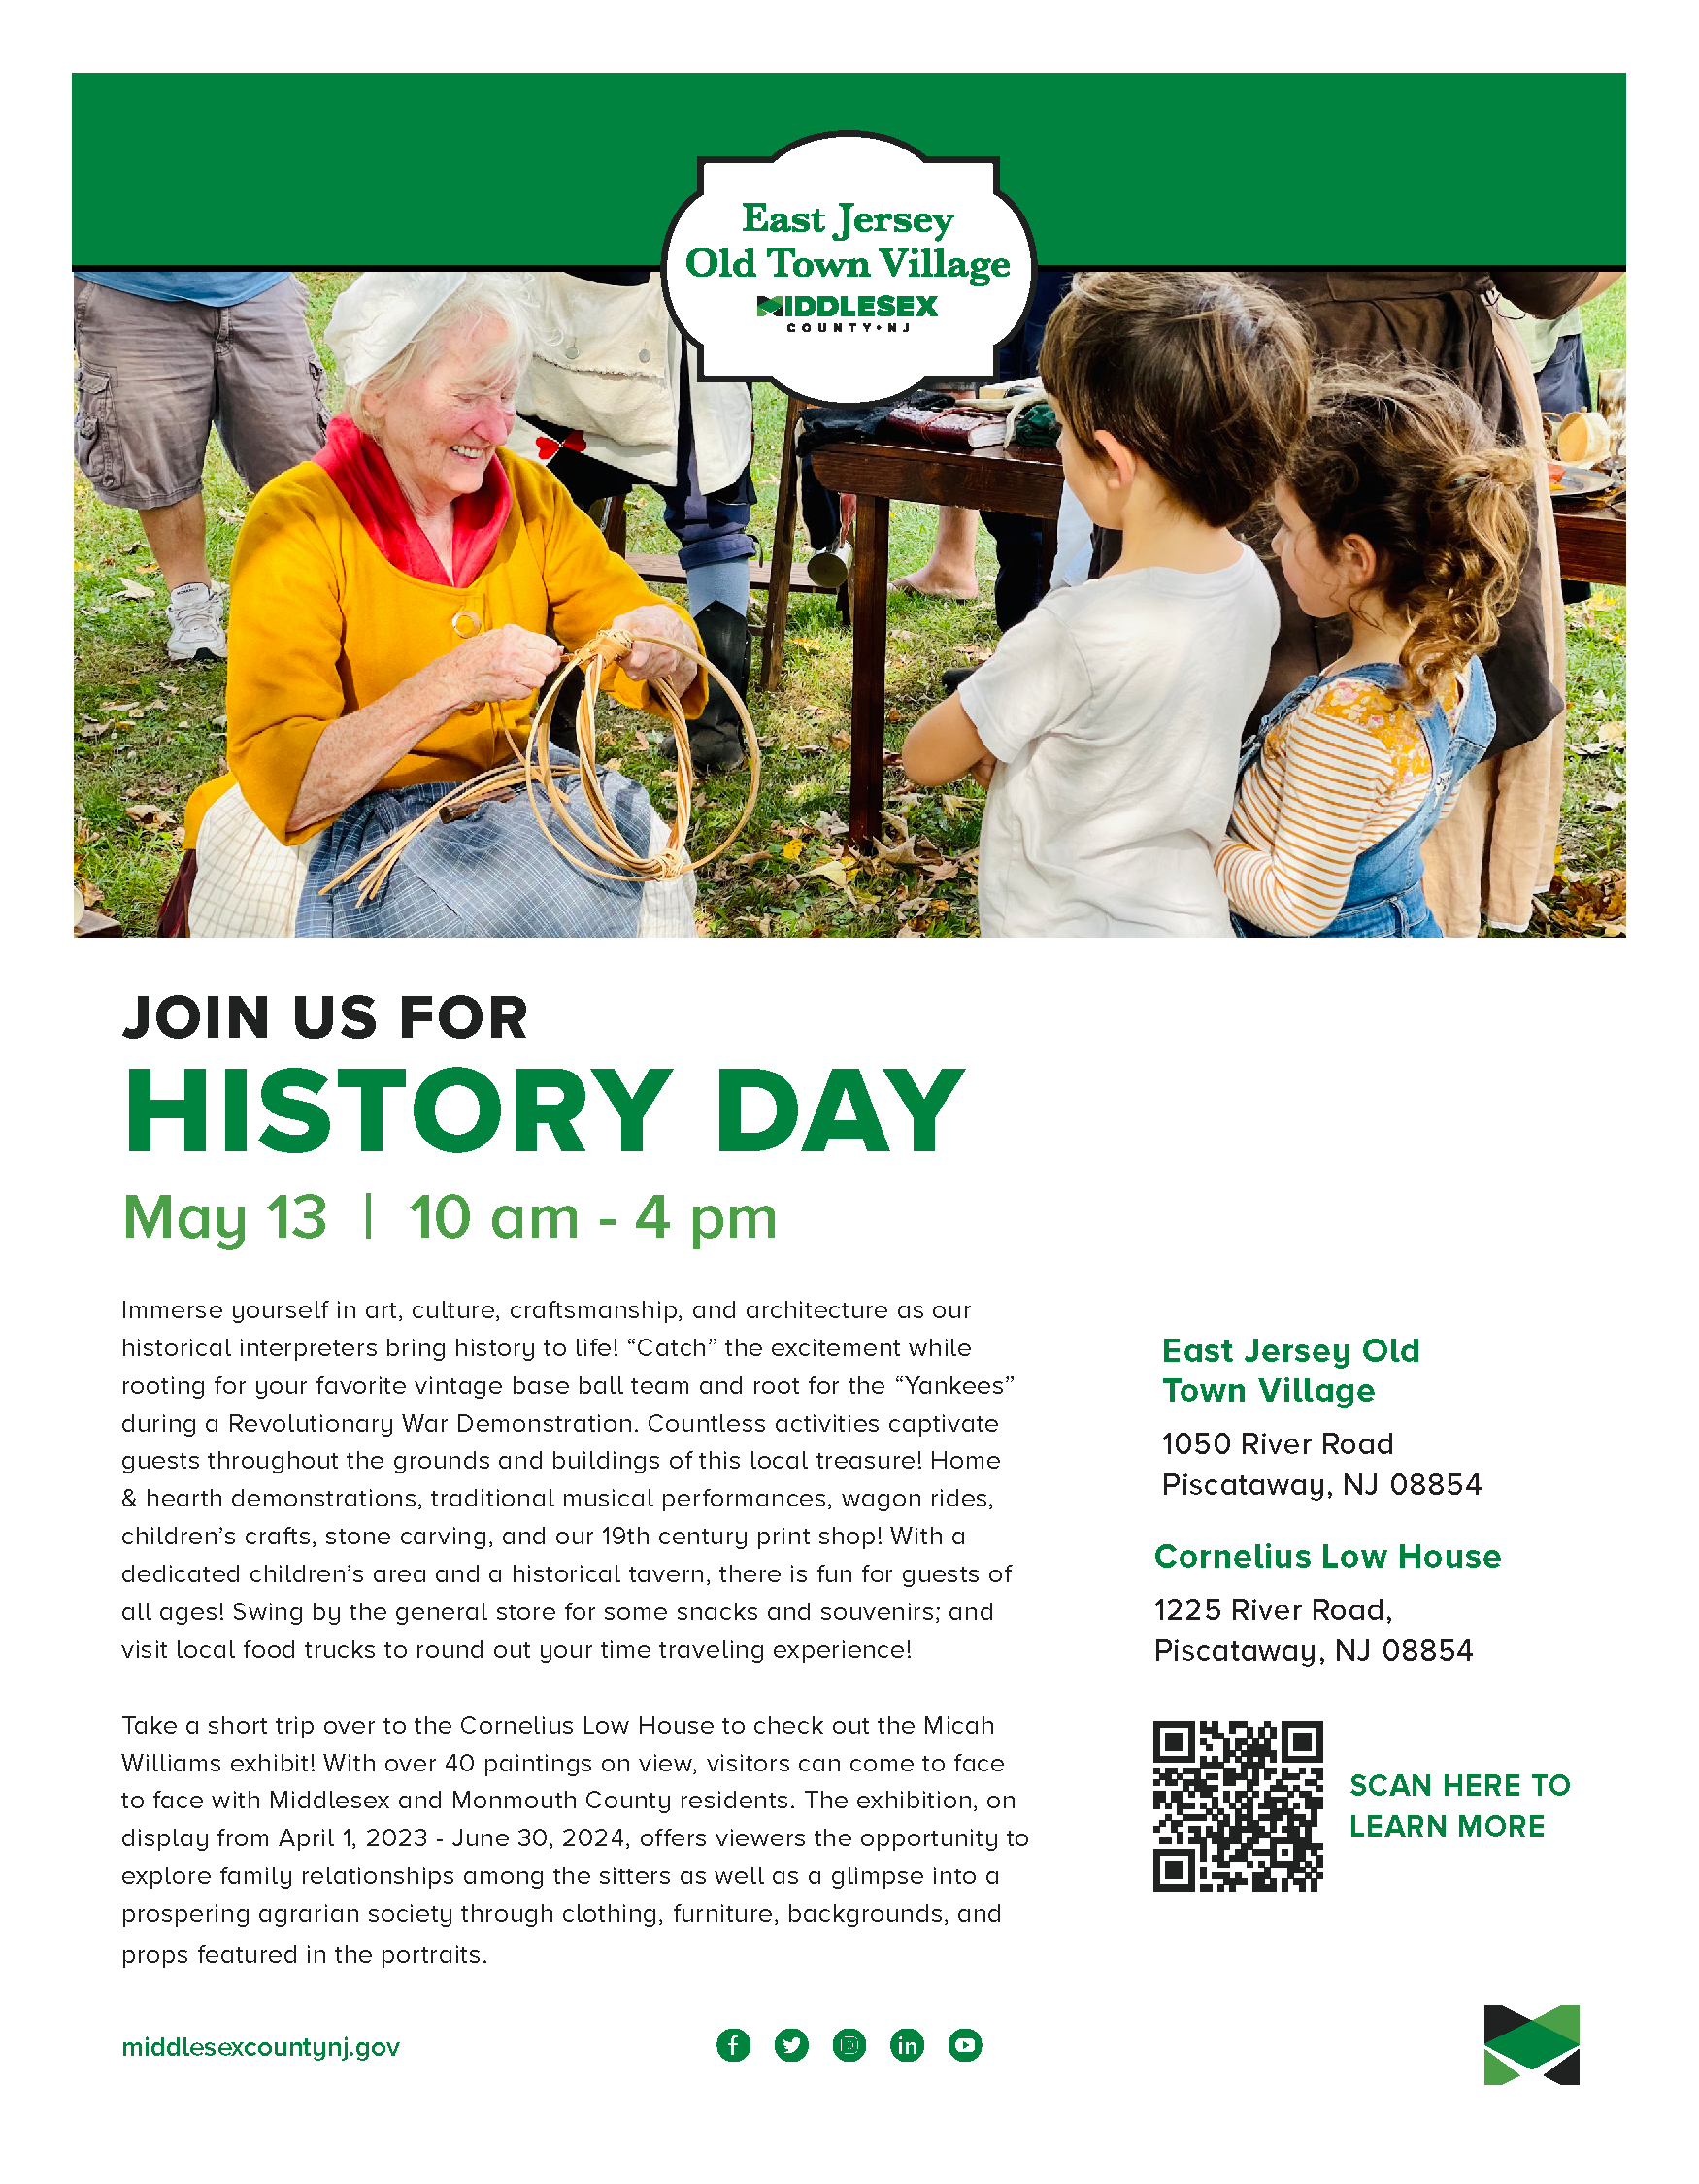 East Jersey Old Town Village History Day — Frontline Arts